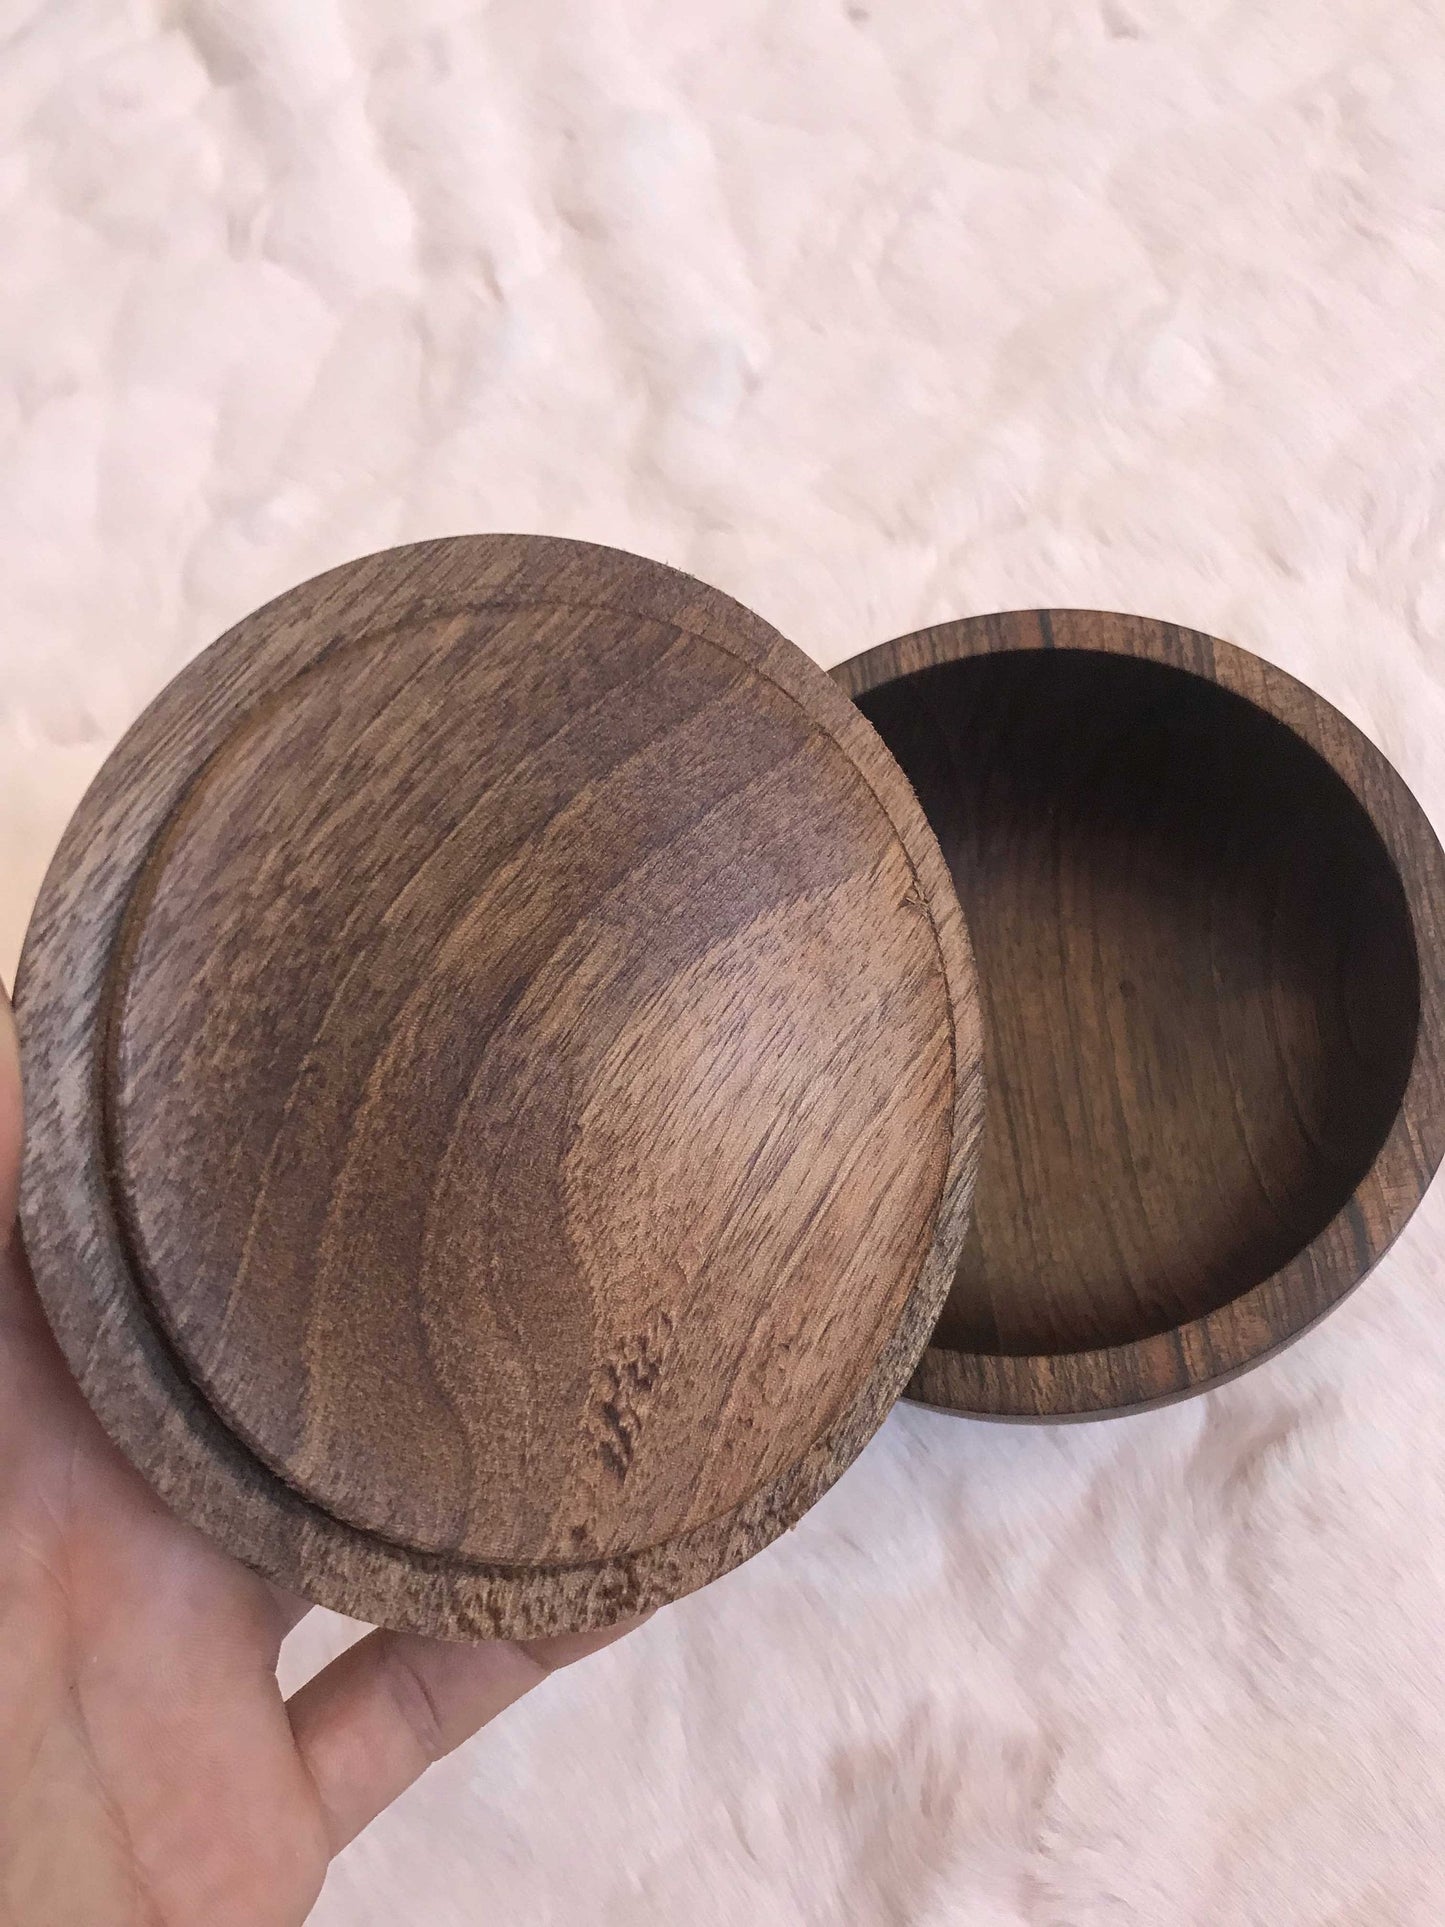 Walnut wood saucer with lid,Serving walnut Tray dry fruit,wooden walnut design,perfect for dry fruits,honey,oil,jam,wooden walnut design